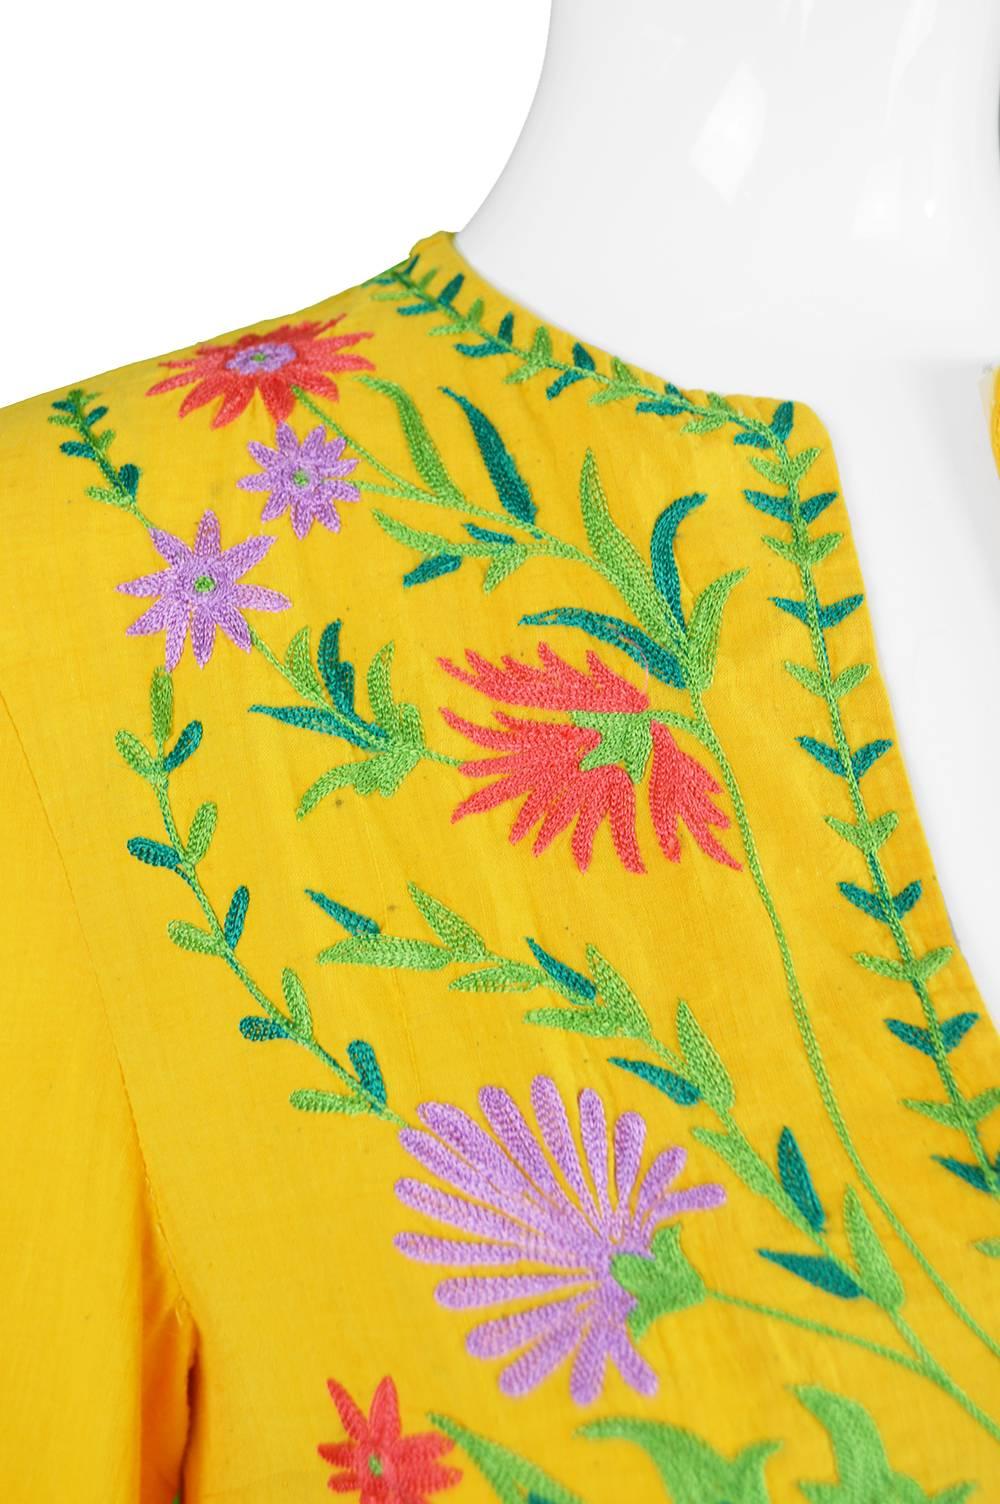 Treacy Lowe Mustard Yellow Hand Embroidered Indian Cotton Mini Dress, 1970s For Sale 4